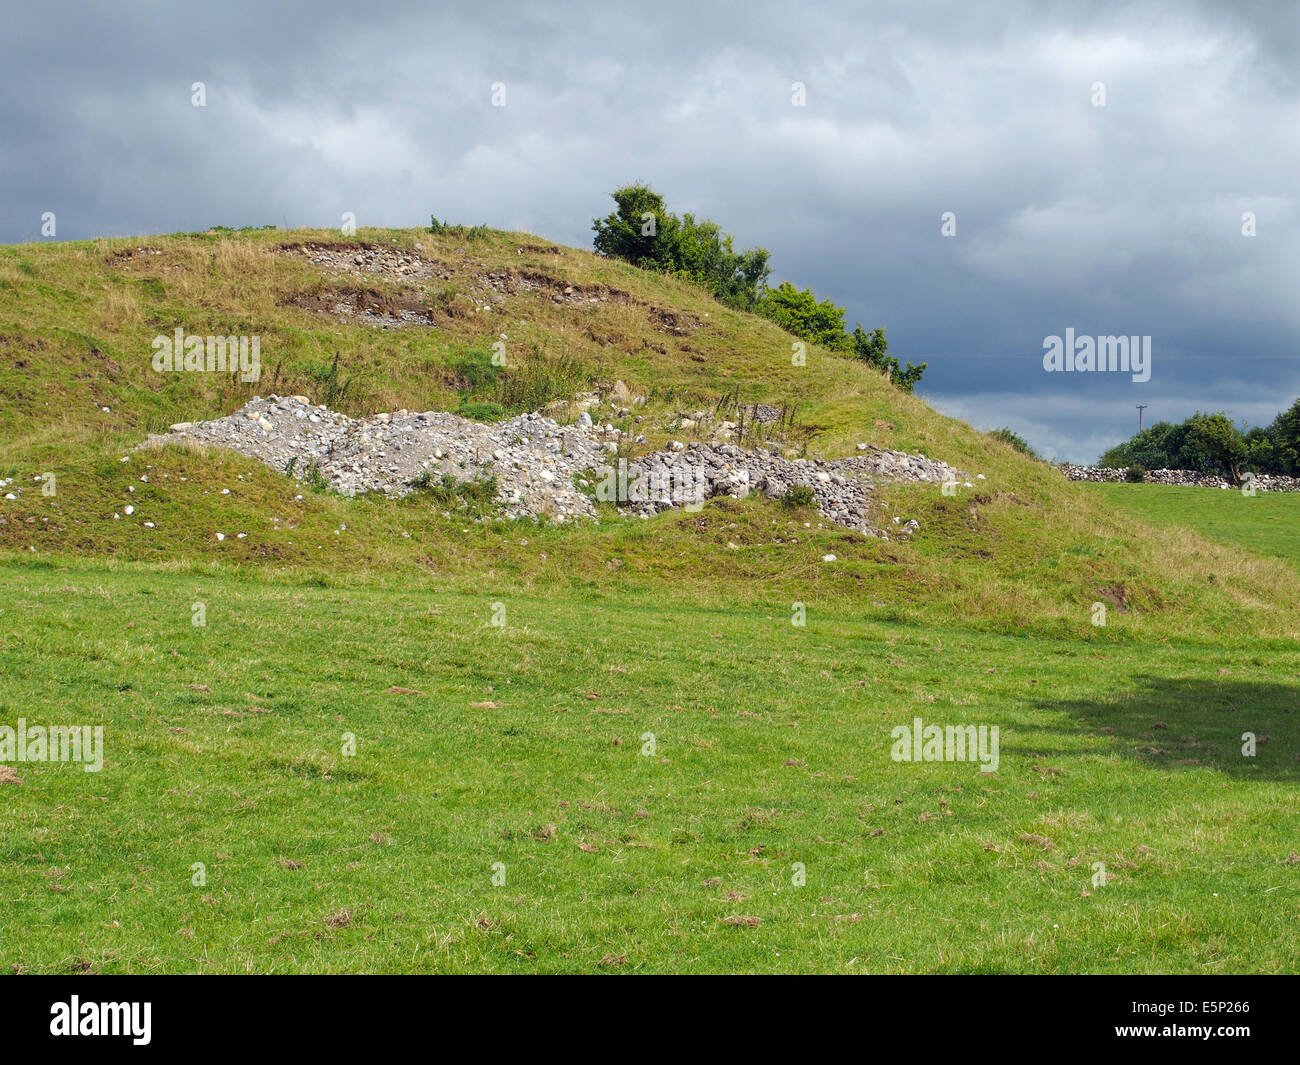 A drumlin, an elongated hill in the shape of an inverted egg is a glacial landform. This example near Dunmore, Galway, Ireland. Stock Photo